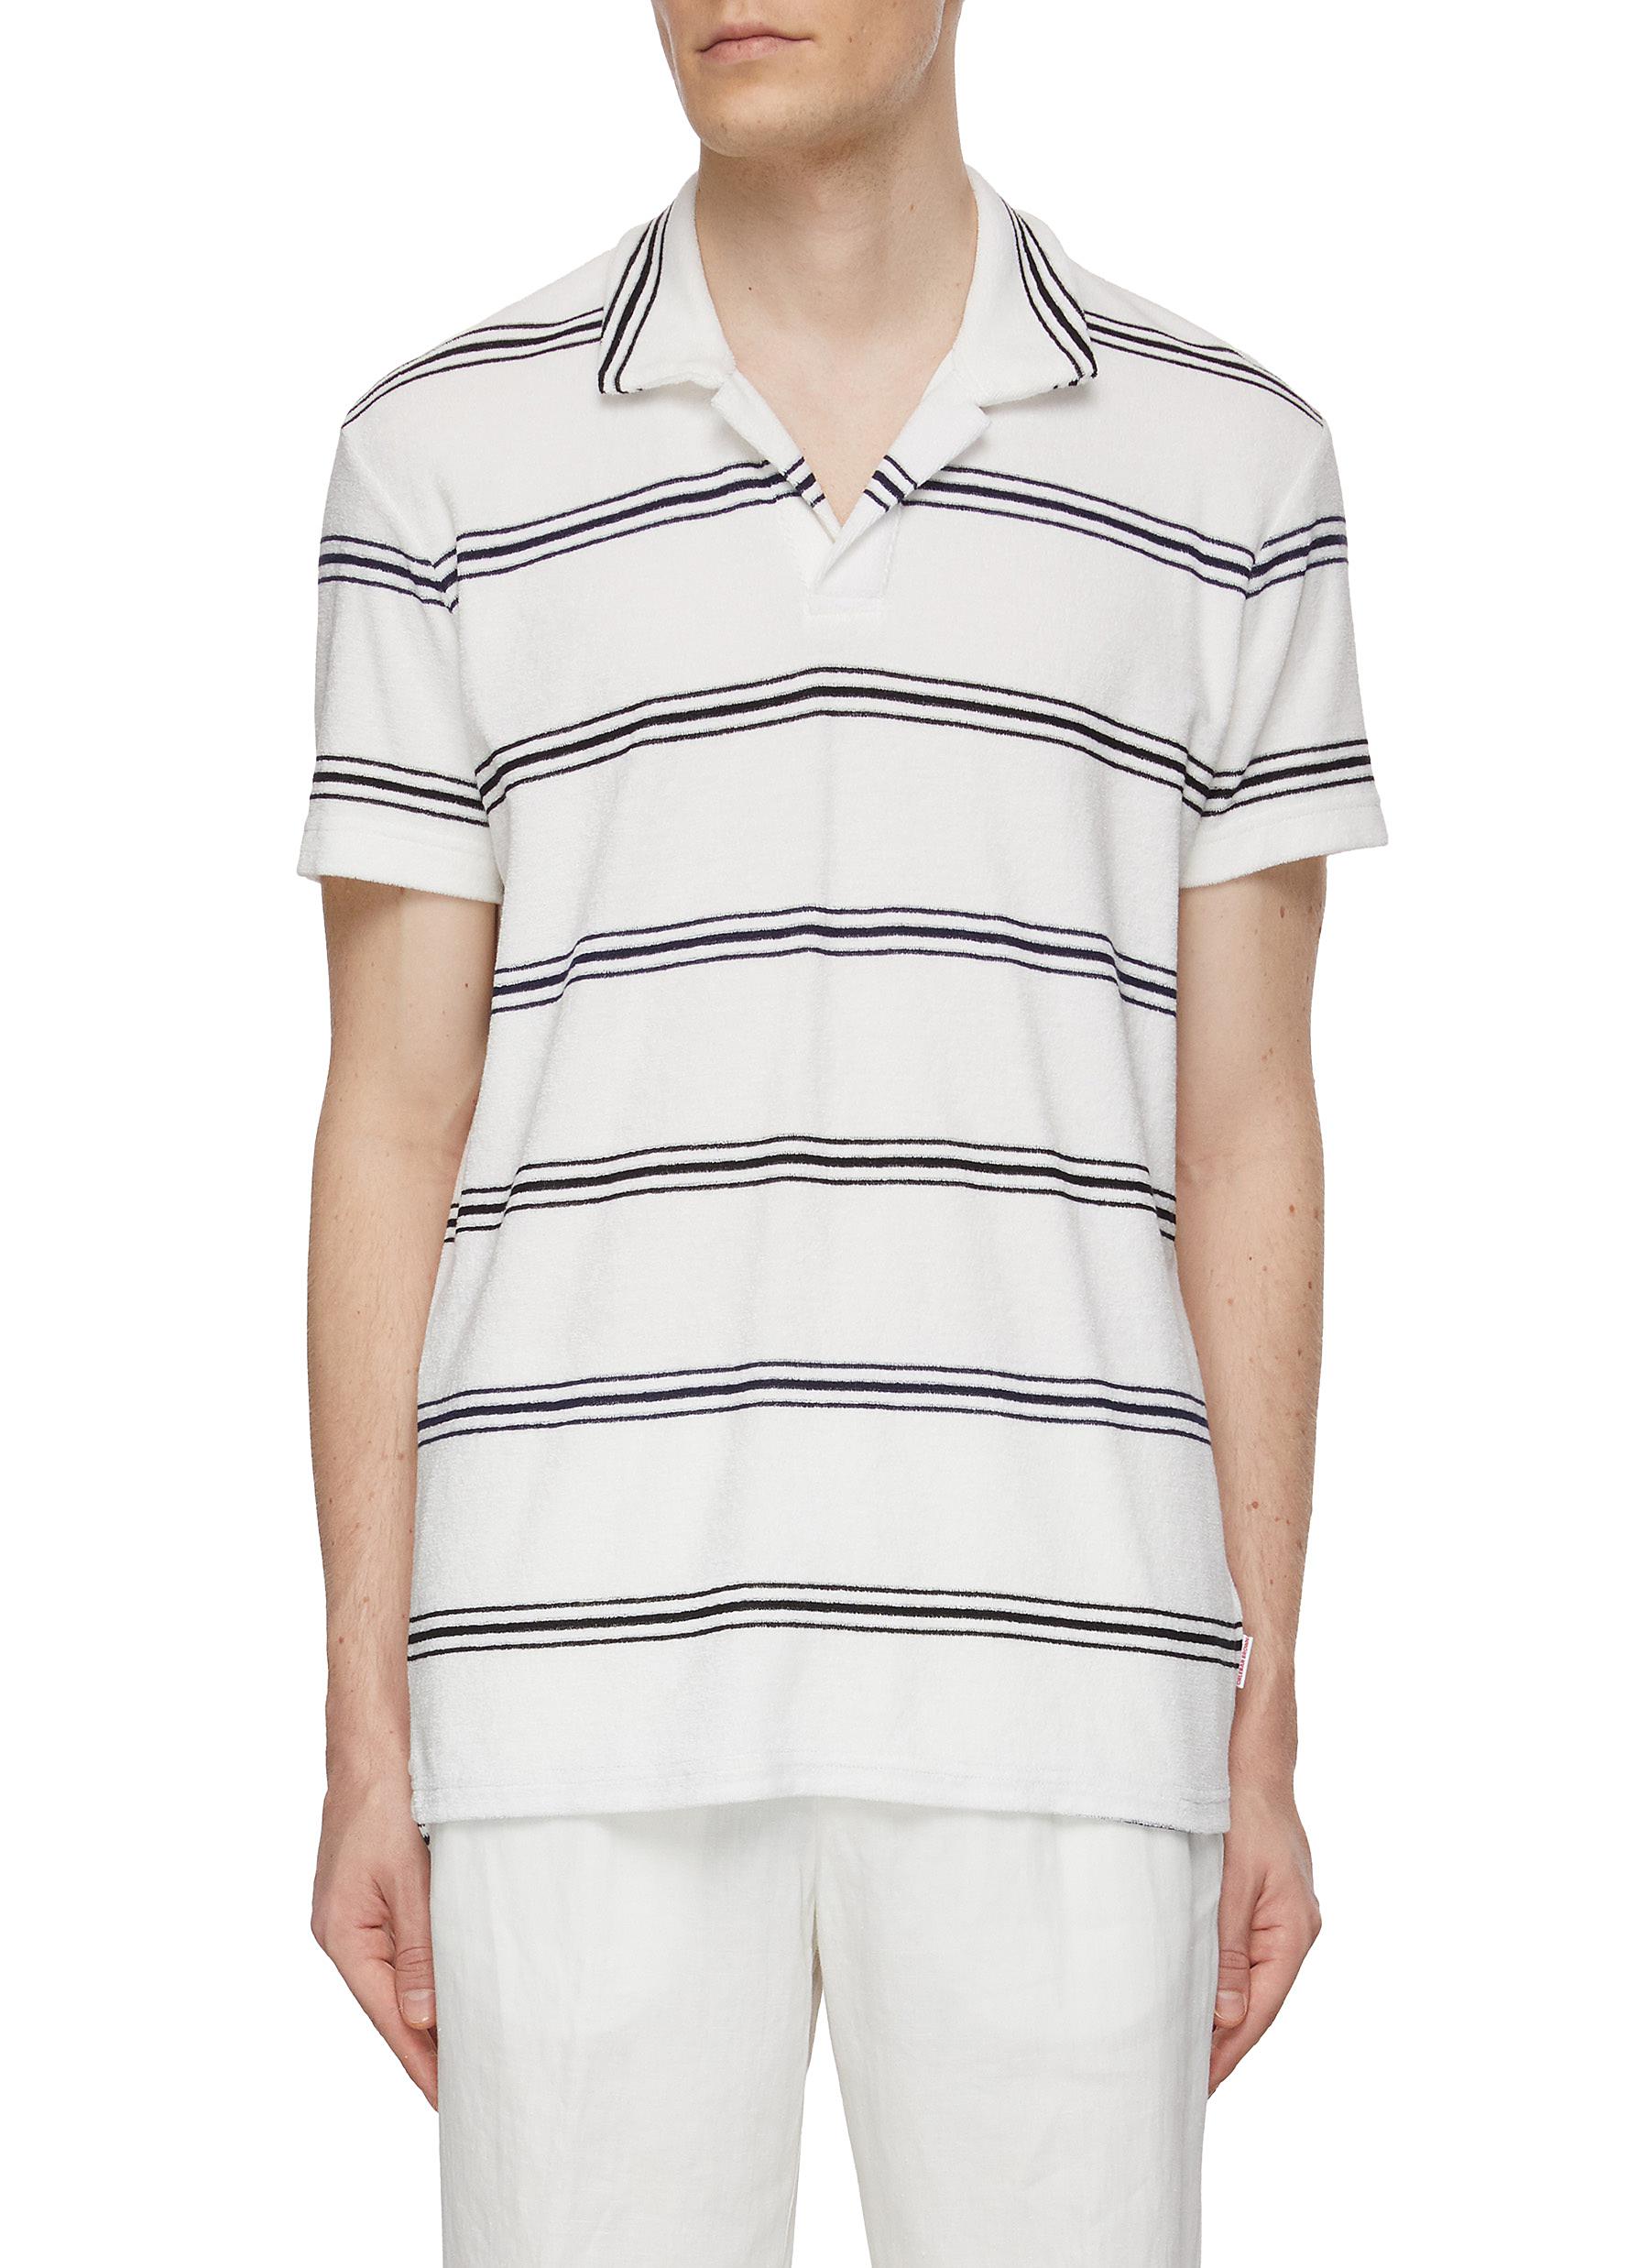 Stripe Terry Towelling Polo Shirt